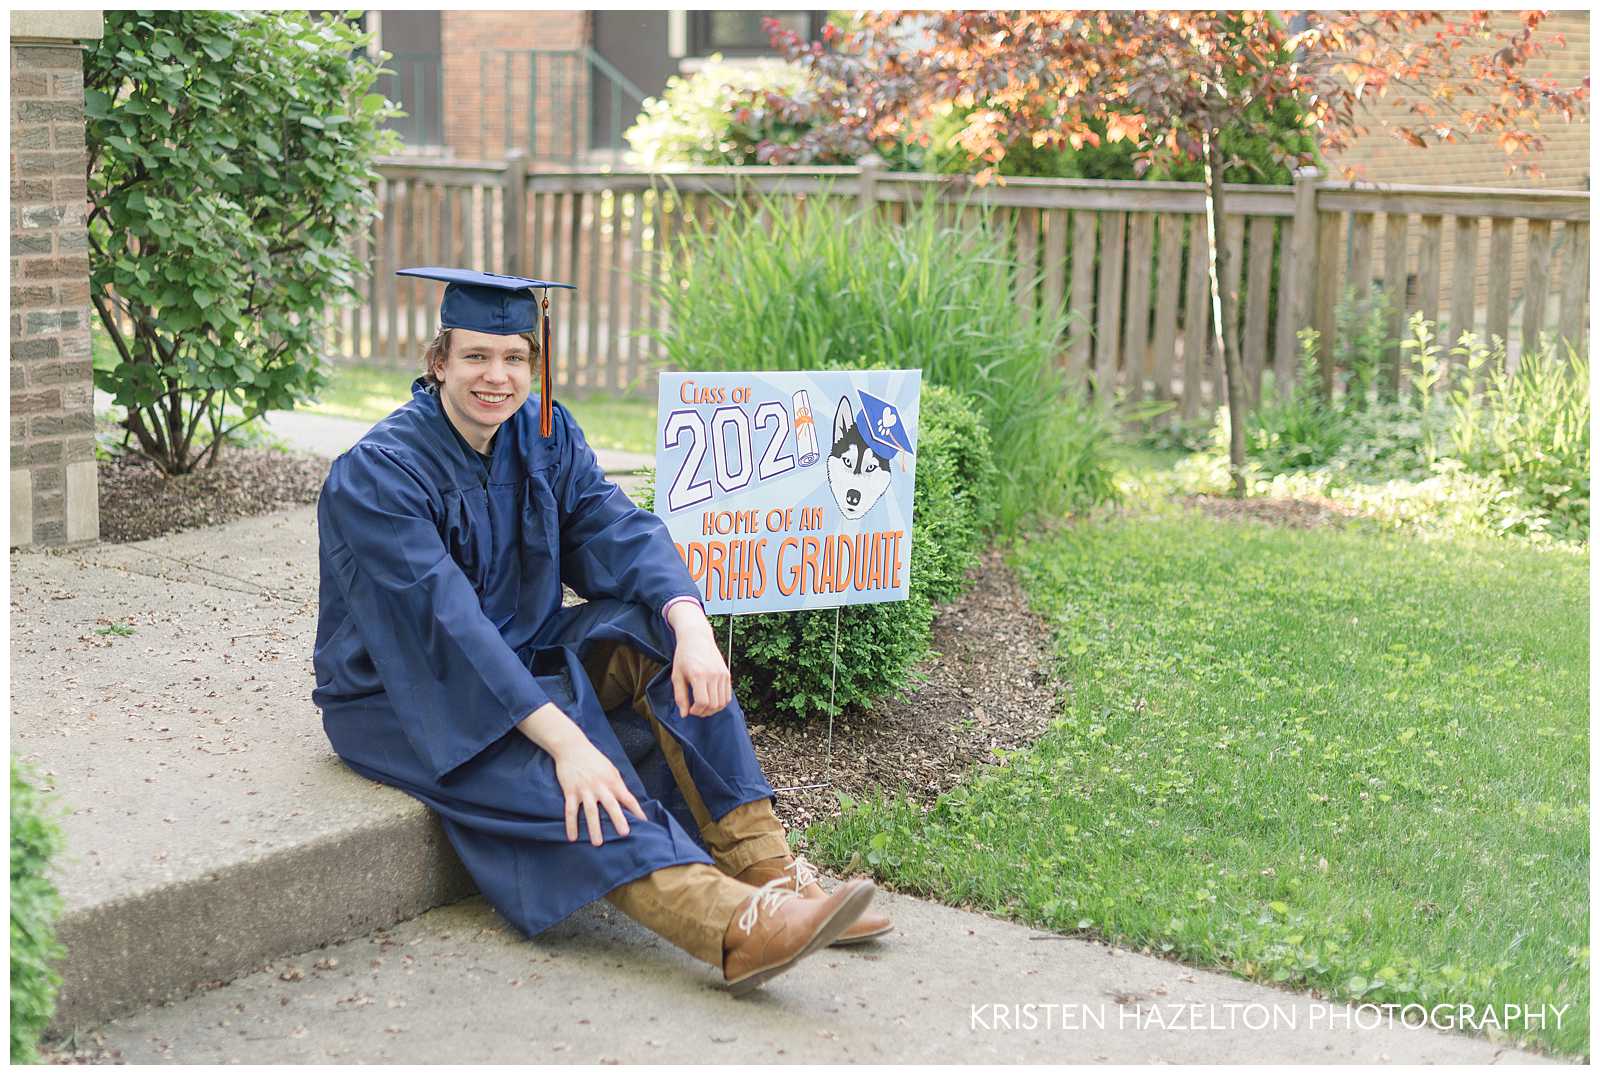 High school senior boy wearing cap and gown, sitting on a step next to a sign that reads "Class of 2021 Home of an OPRFHS Graduate."